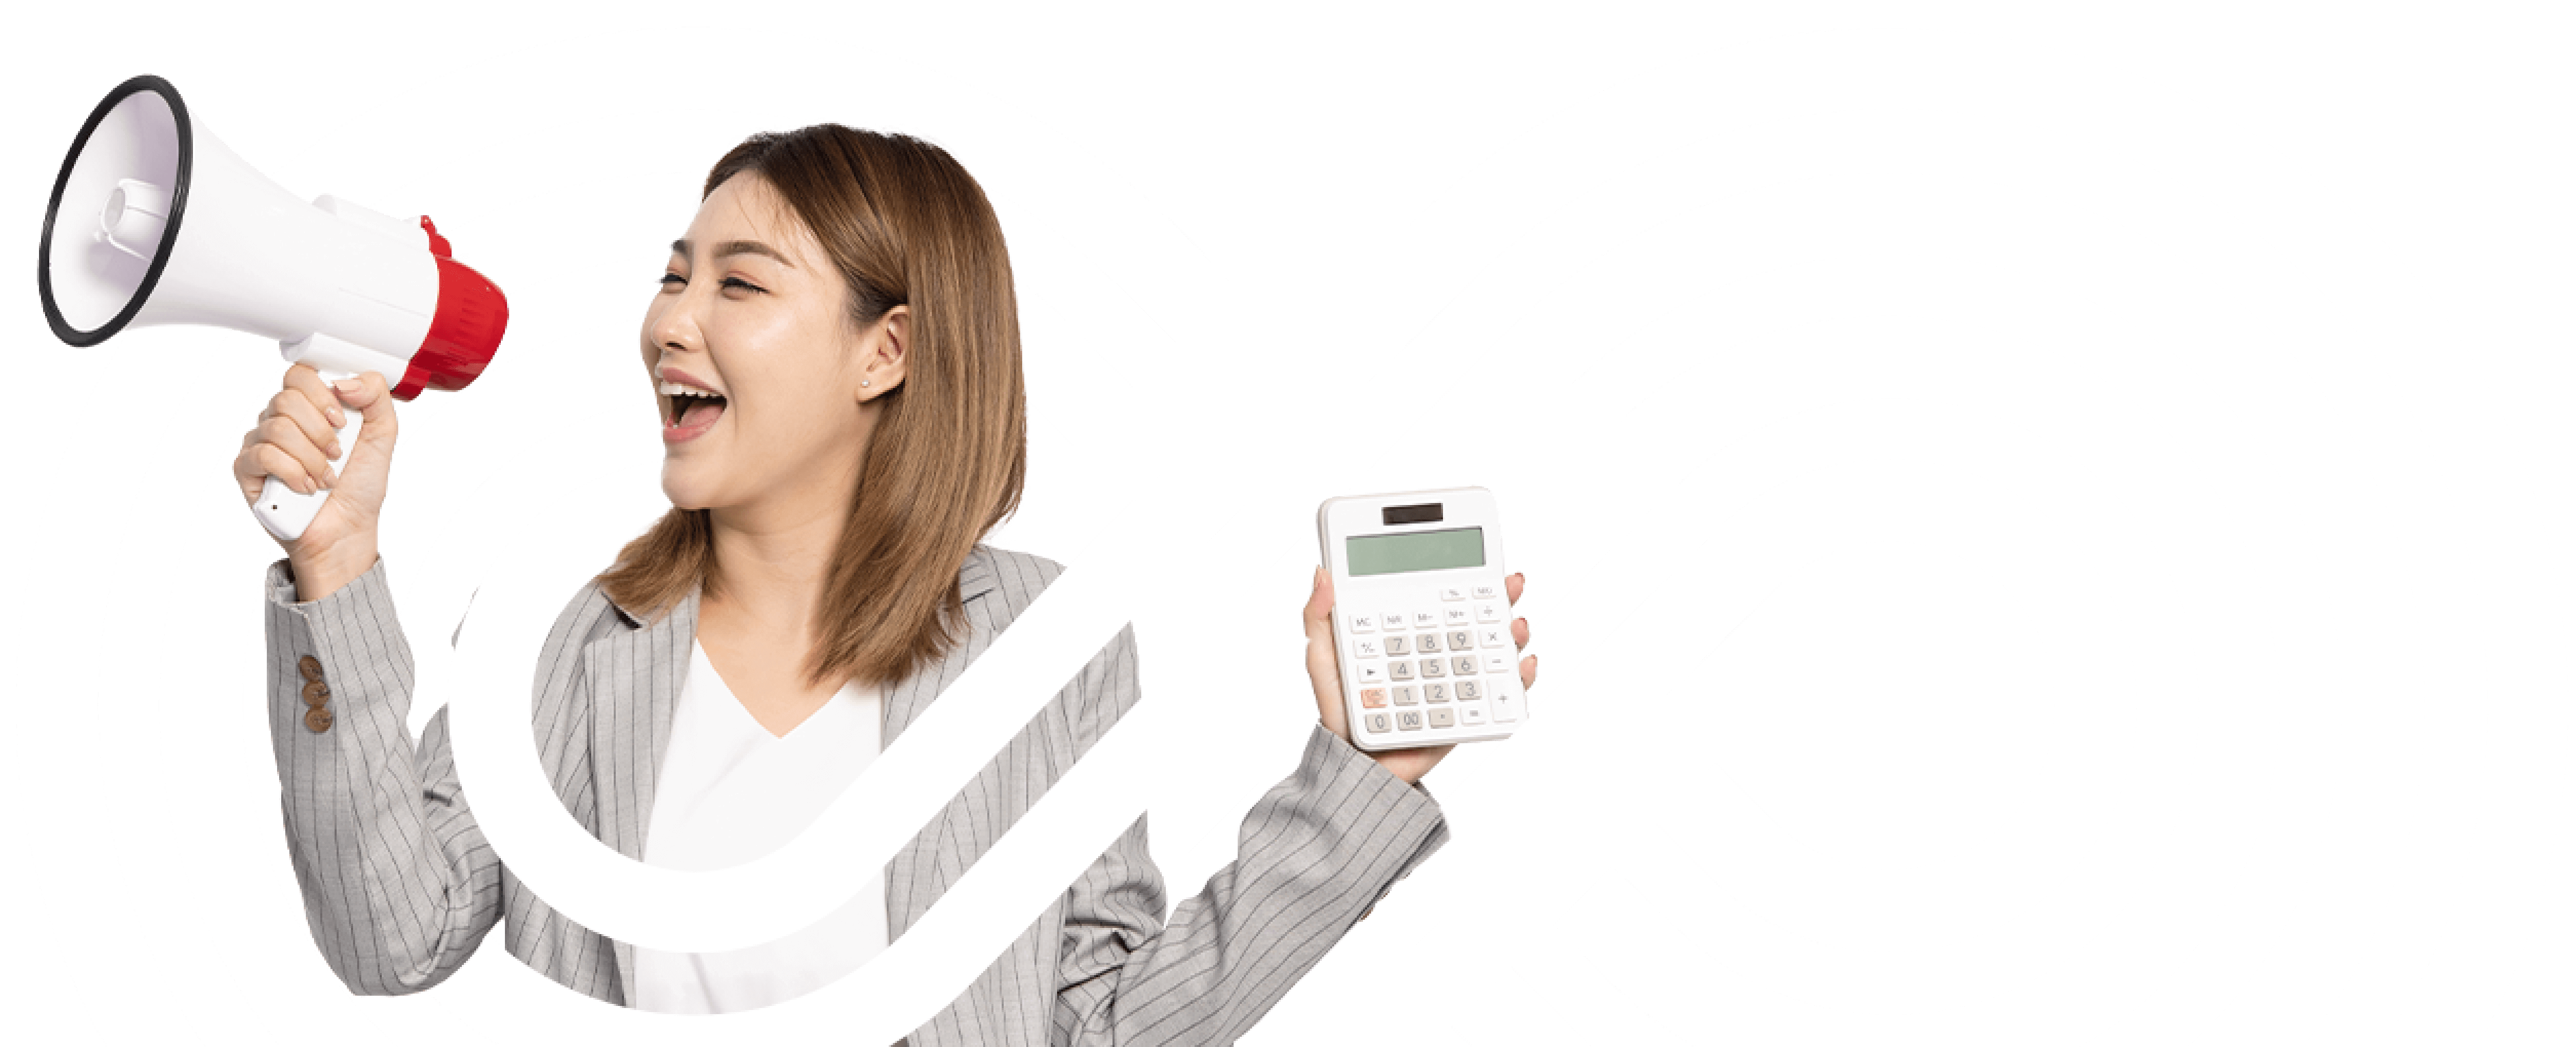 Woman shouting using megaphone while holding a calculator